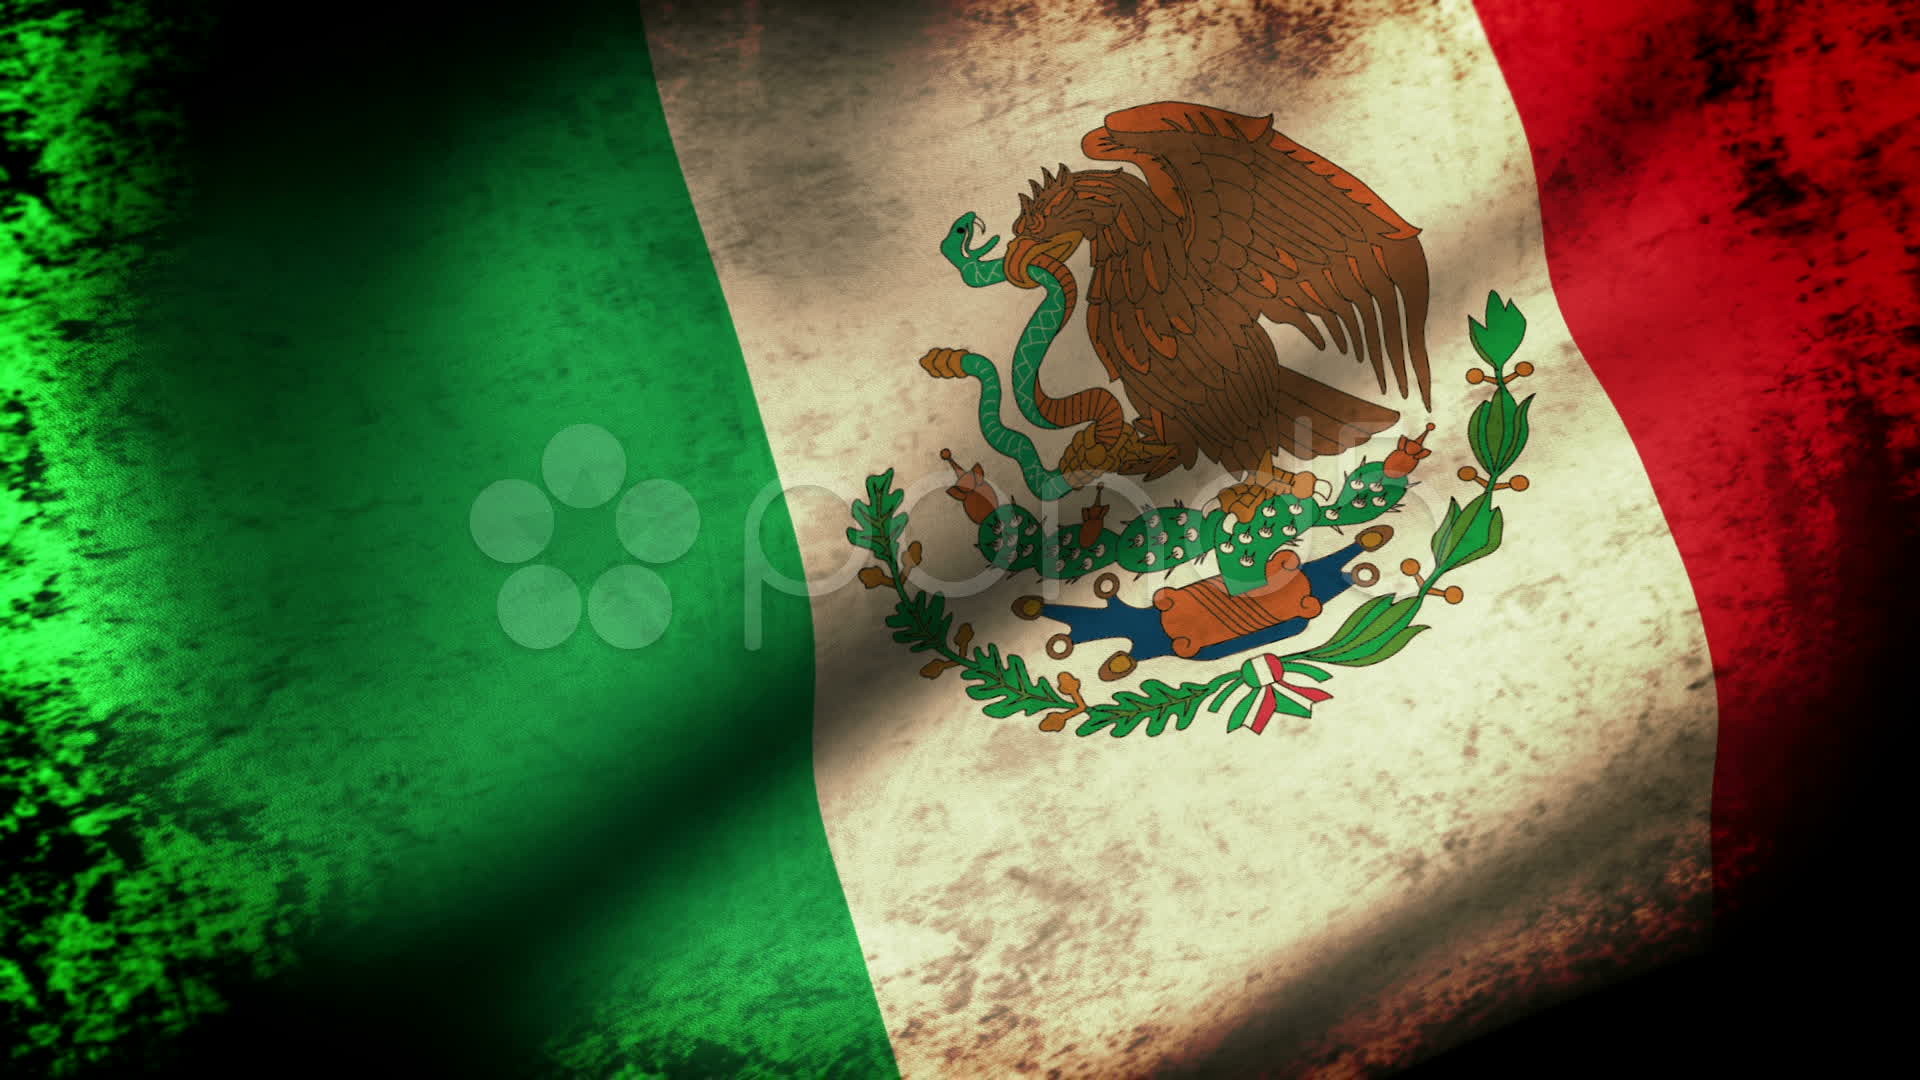 Download Mexico wallpaper by philvb now Browse millions of popular flag  wallpapers and ringtones on Zedge and  Mexico wallpaper Mexican culture  art Mexican art